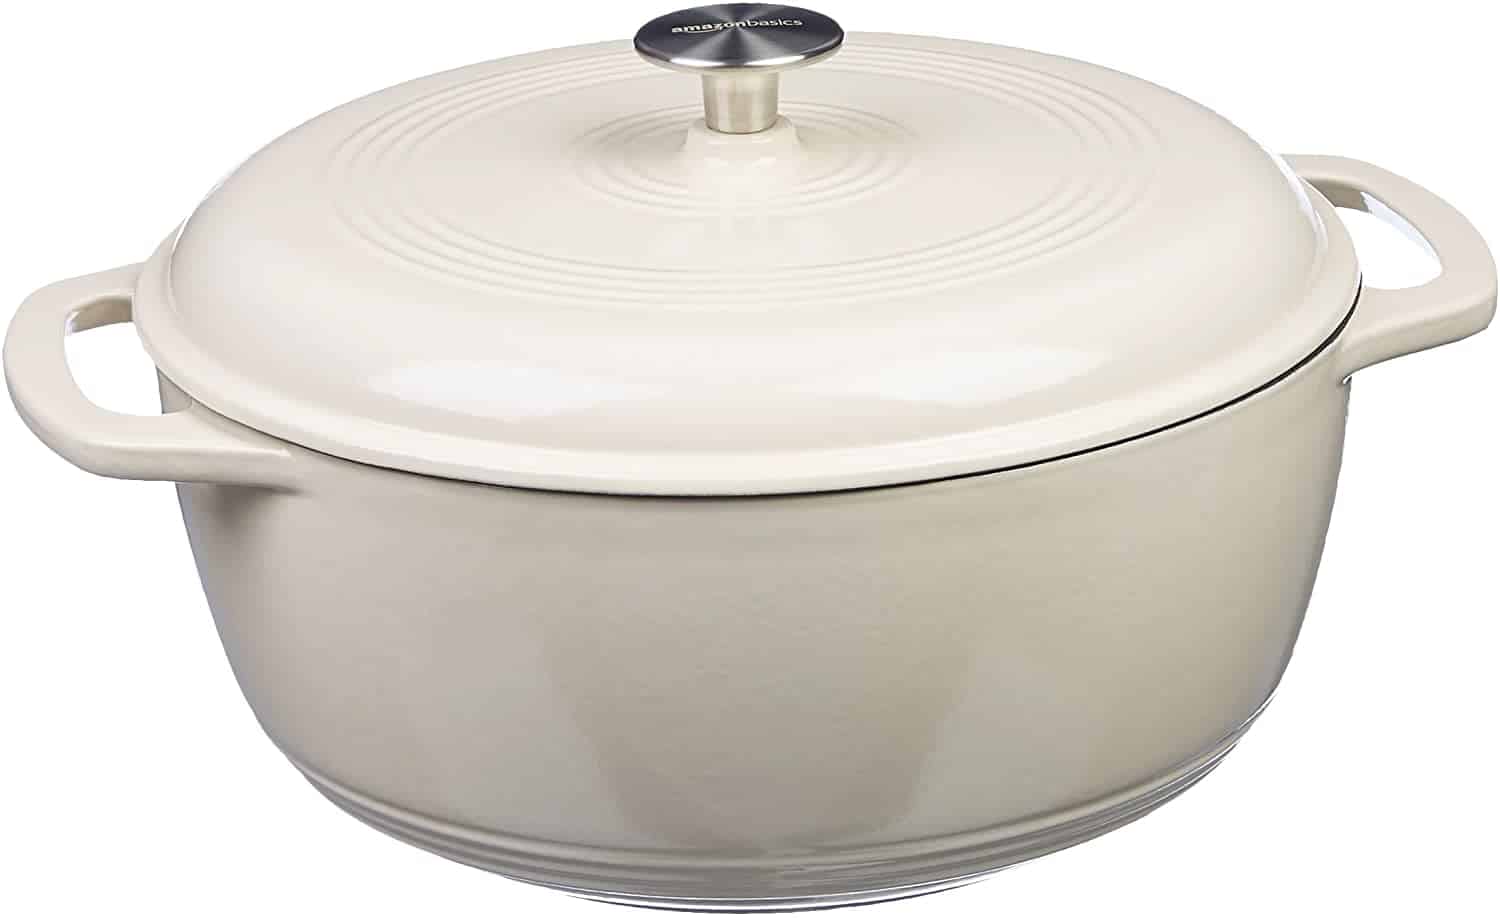 Image of Dutch oven